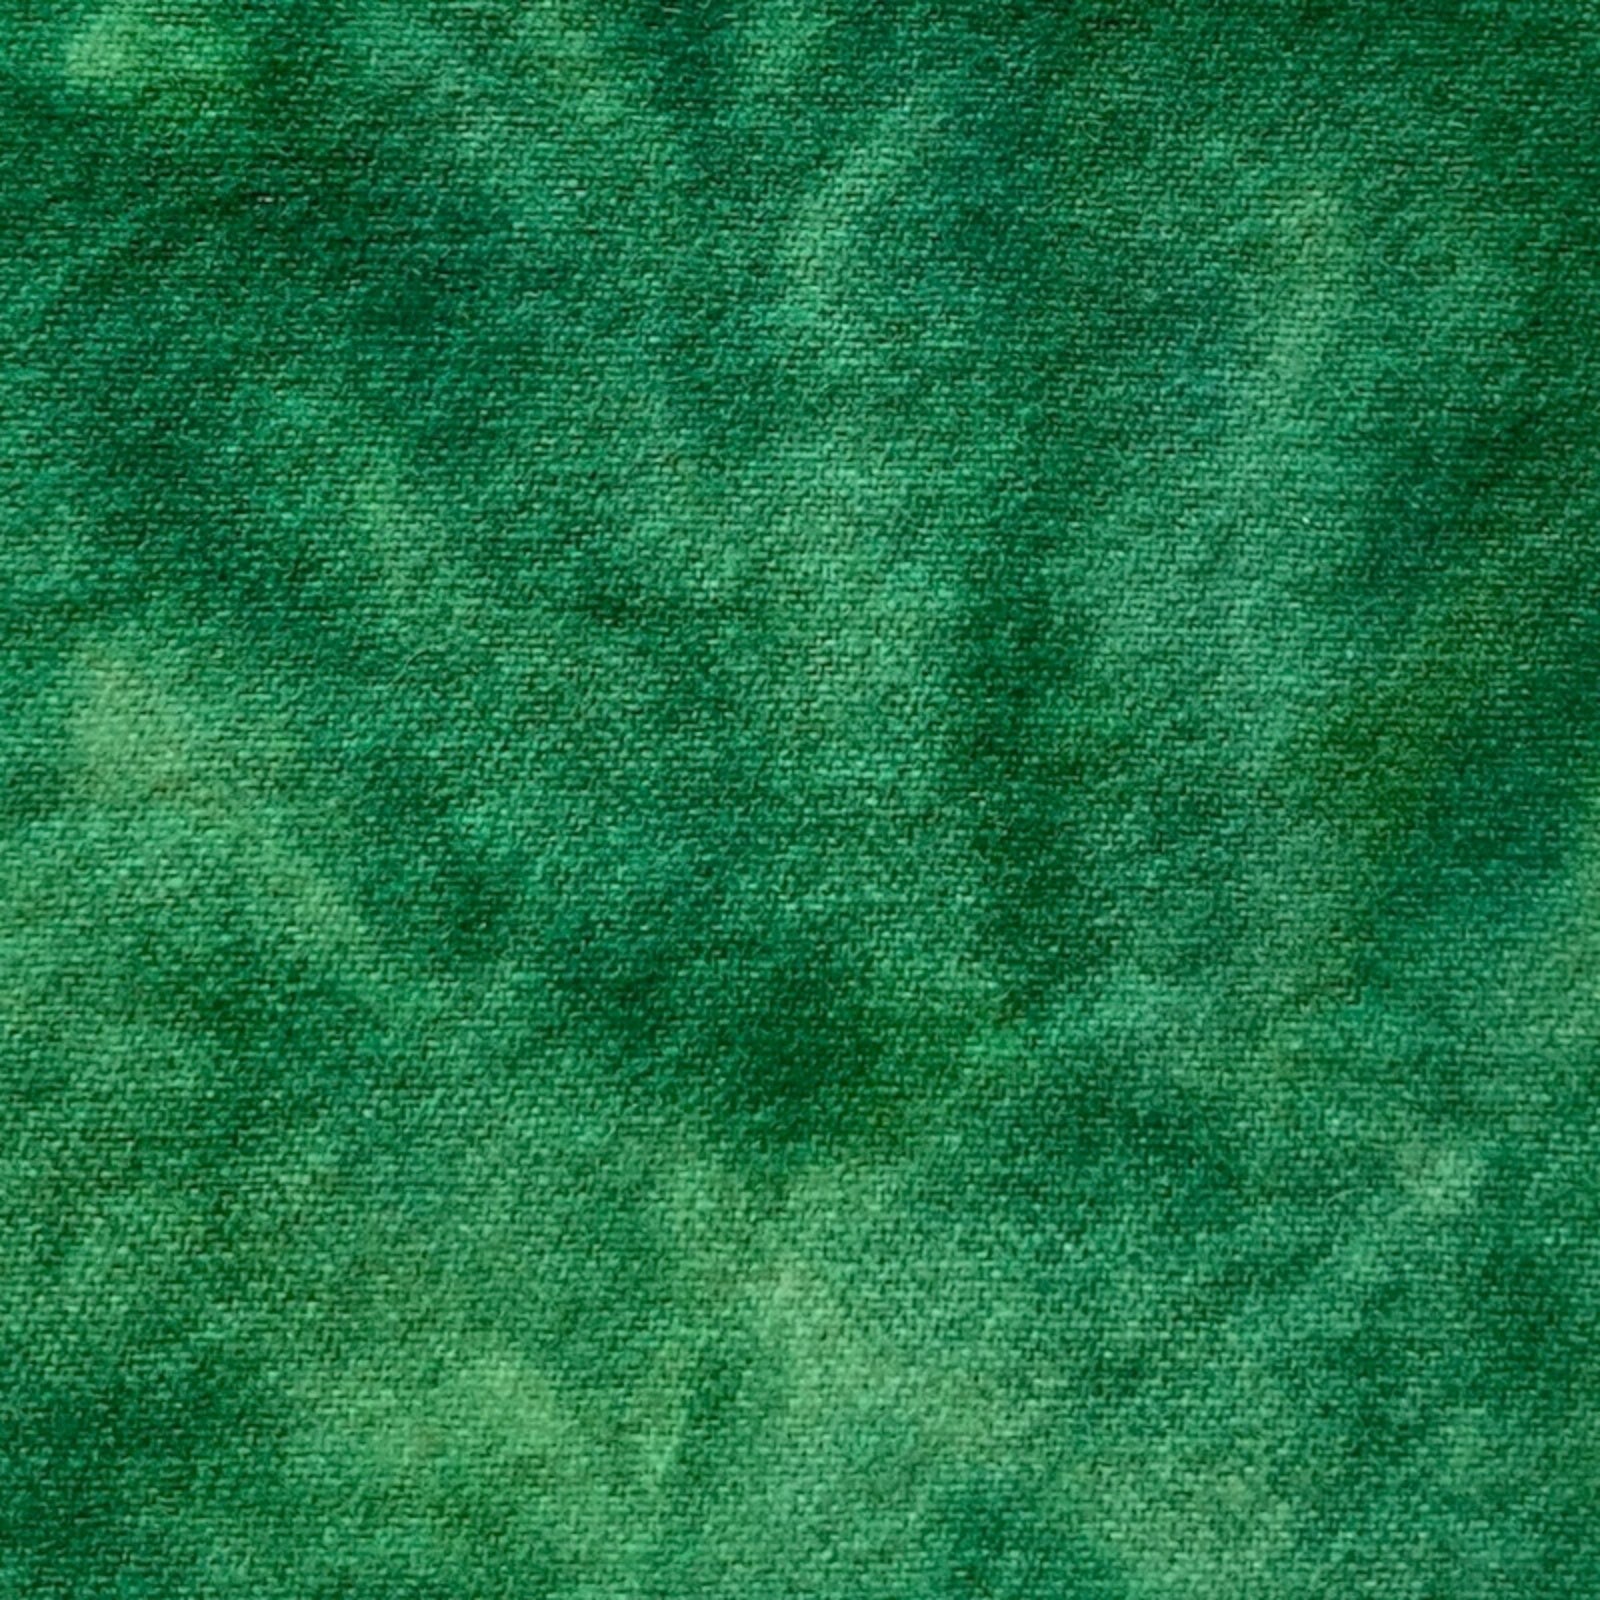 Lucky Green - Colorama Hand Dyed Wool - Offered by HoneyBee Hive Rug Hooking